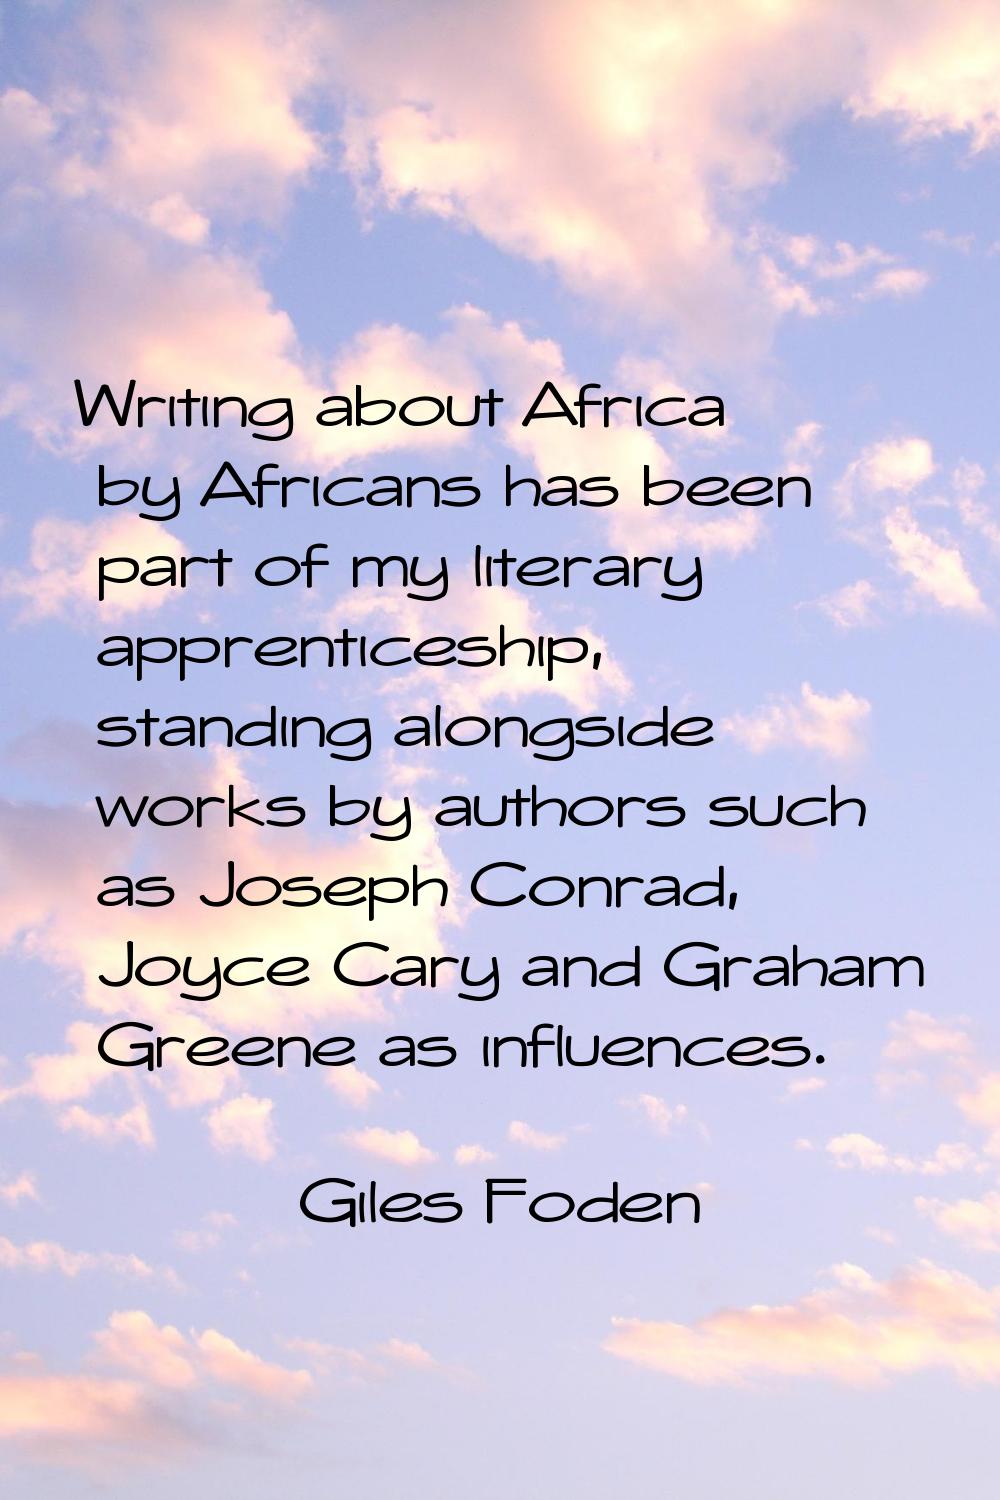 Writing about Africa by Africans has been part of my literary apprenticeship, standing alongside wo